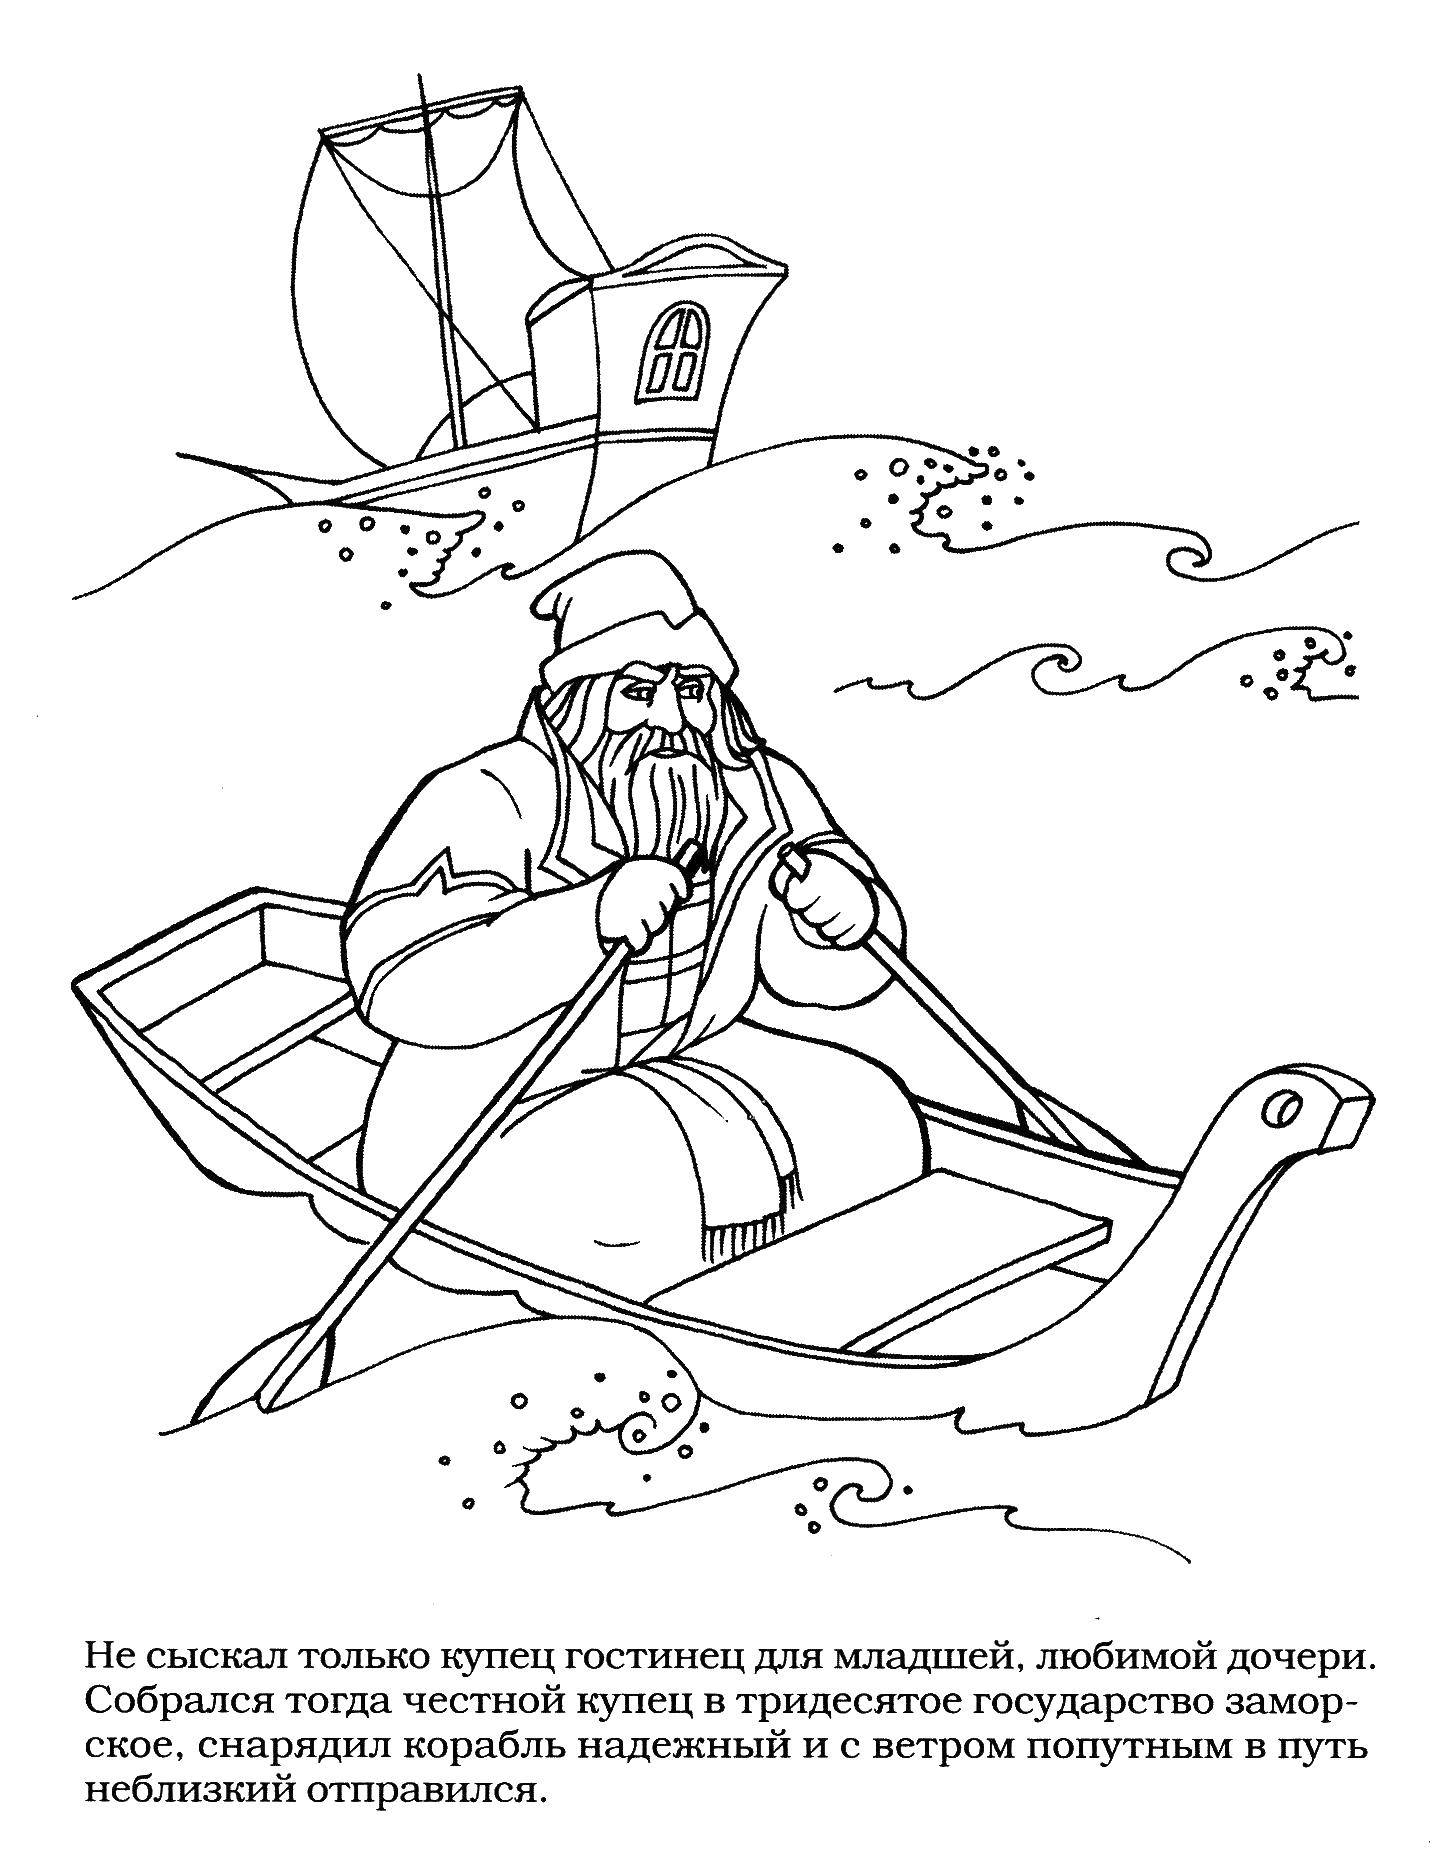 Coloring The merchant on the boat. Category Fairy tales. Tags:  tales of the sea, merchant of the, boat.